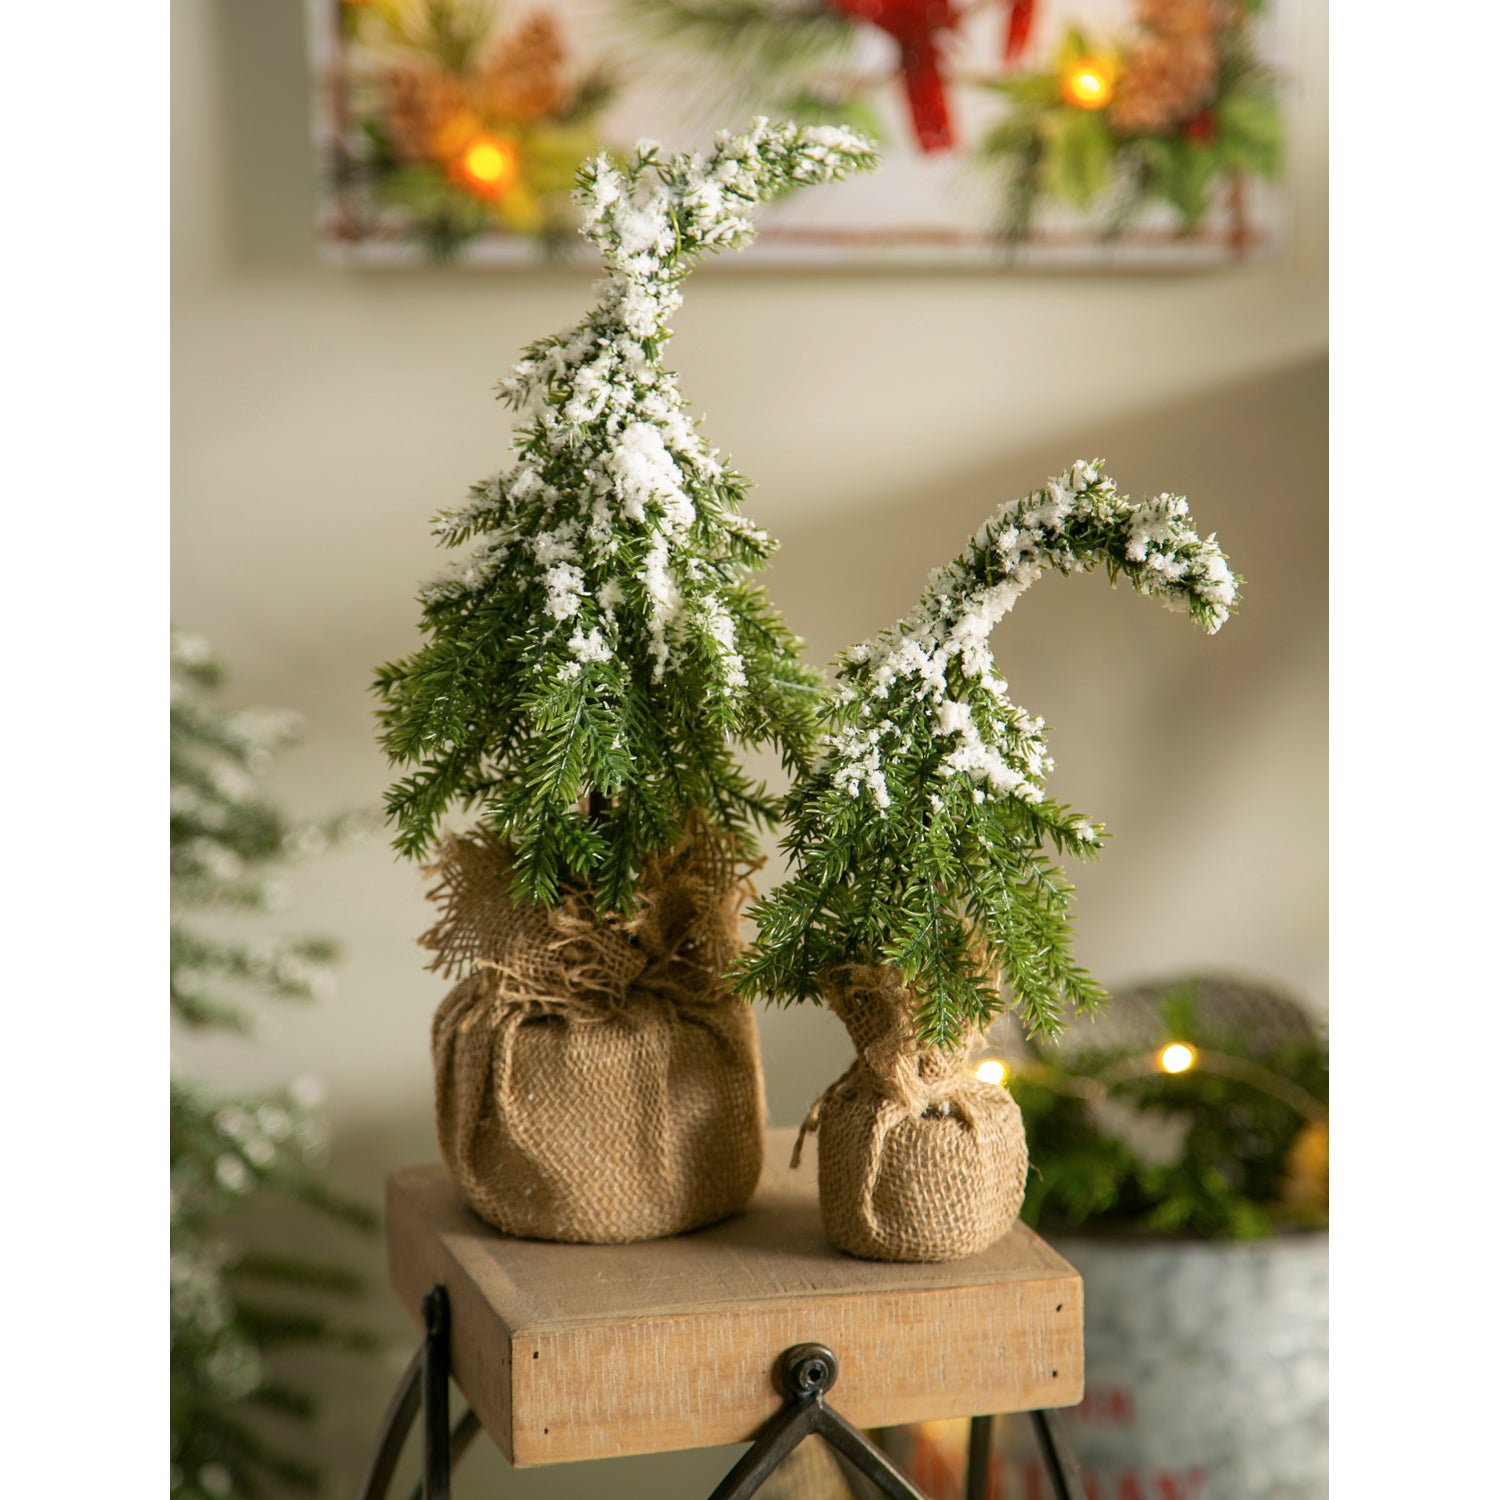 Snow Covered Tree in Burlap Pot, Set of 2